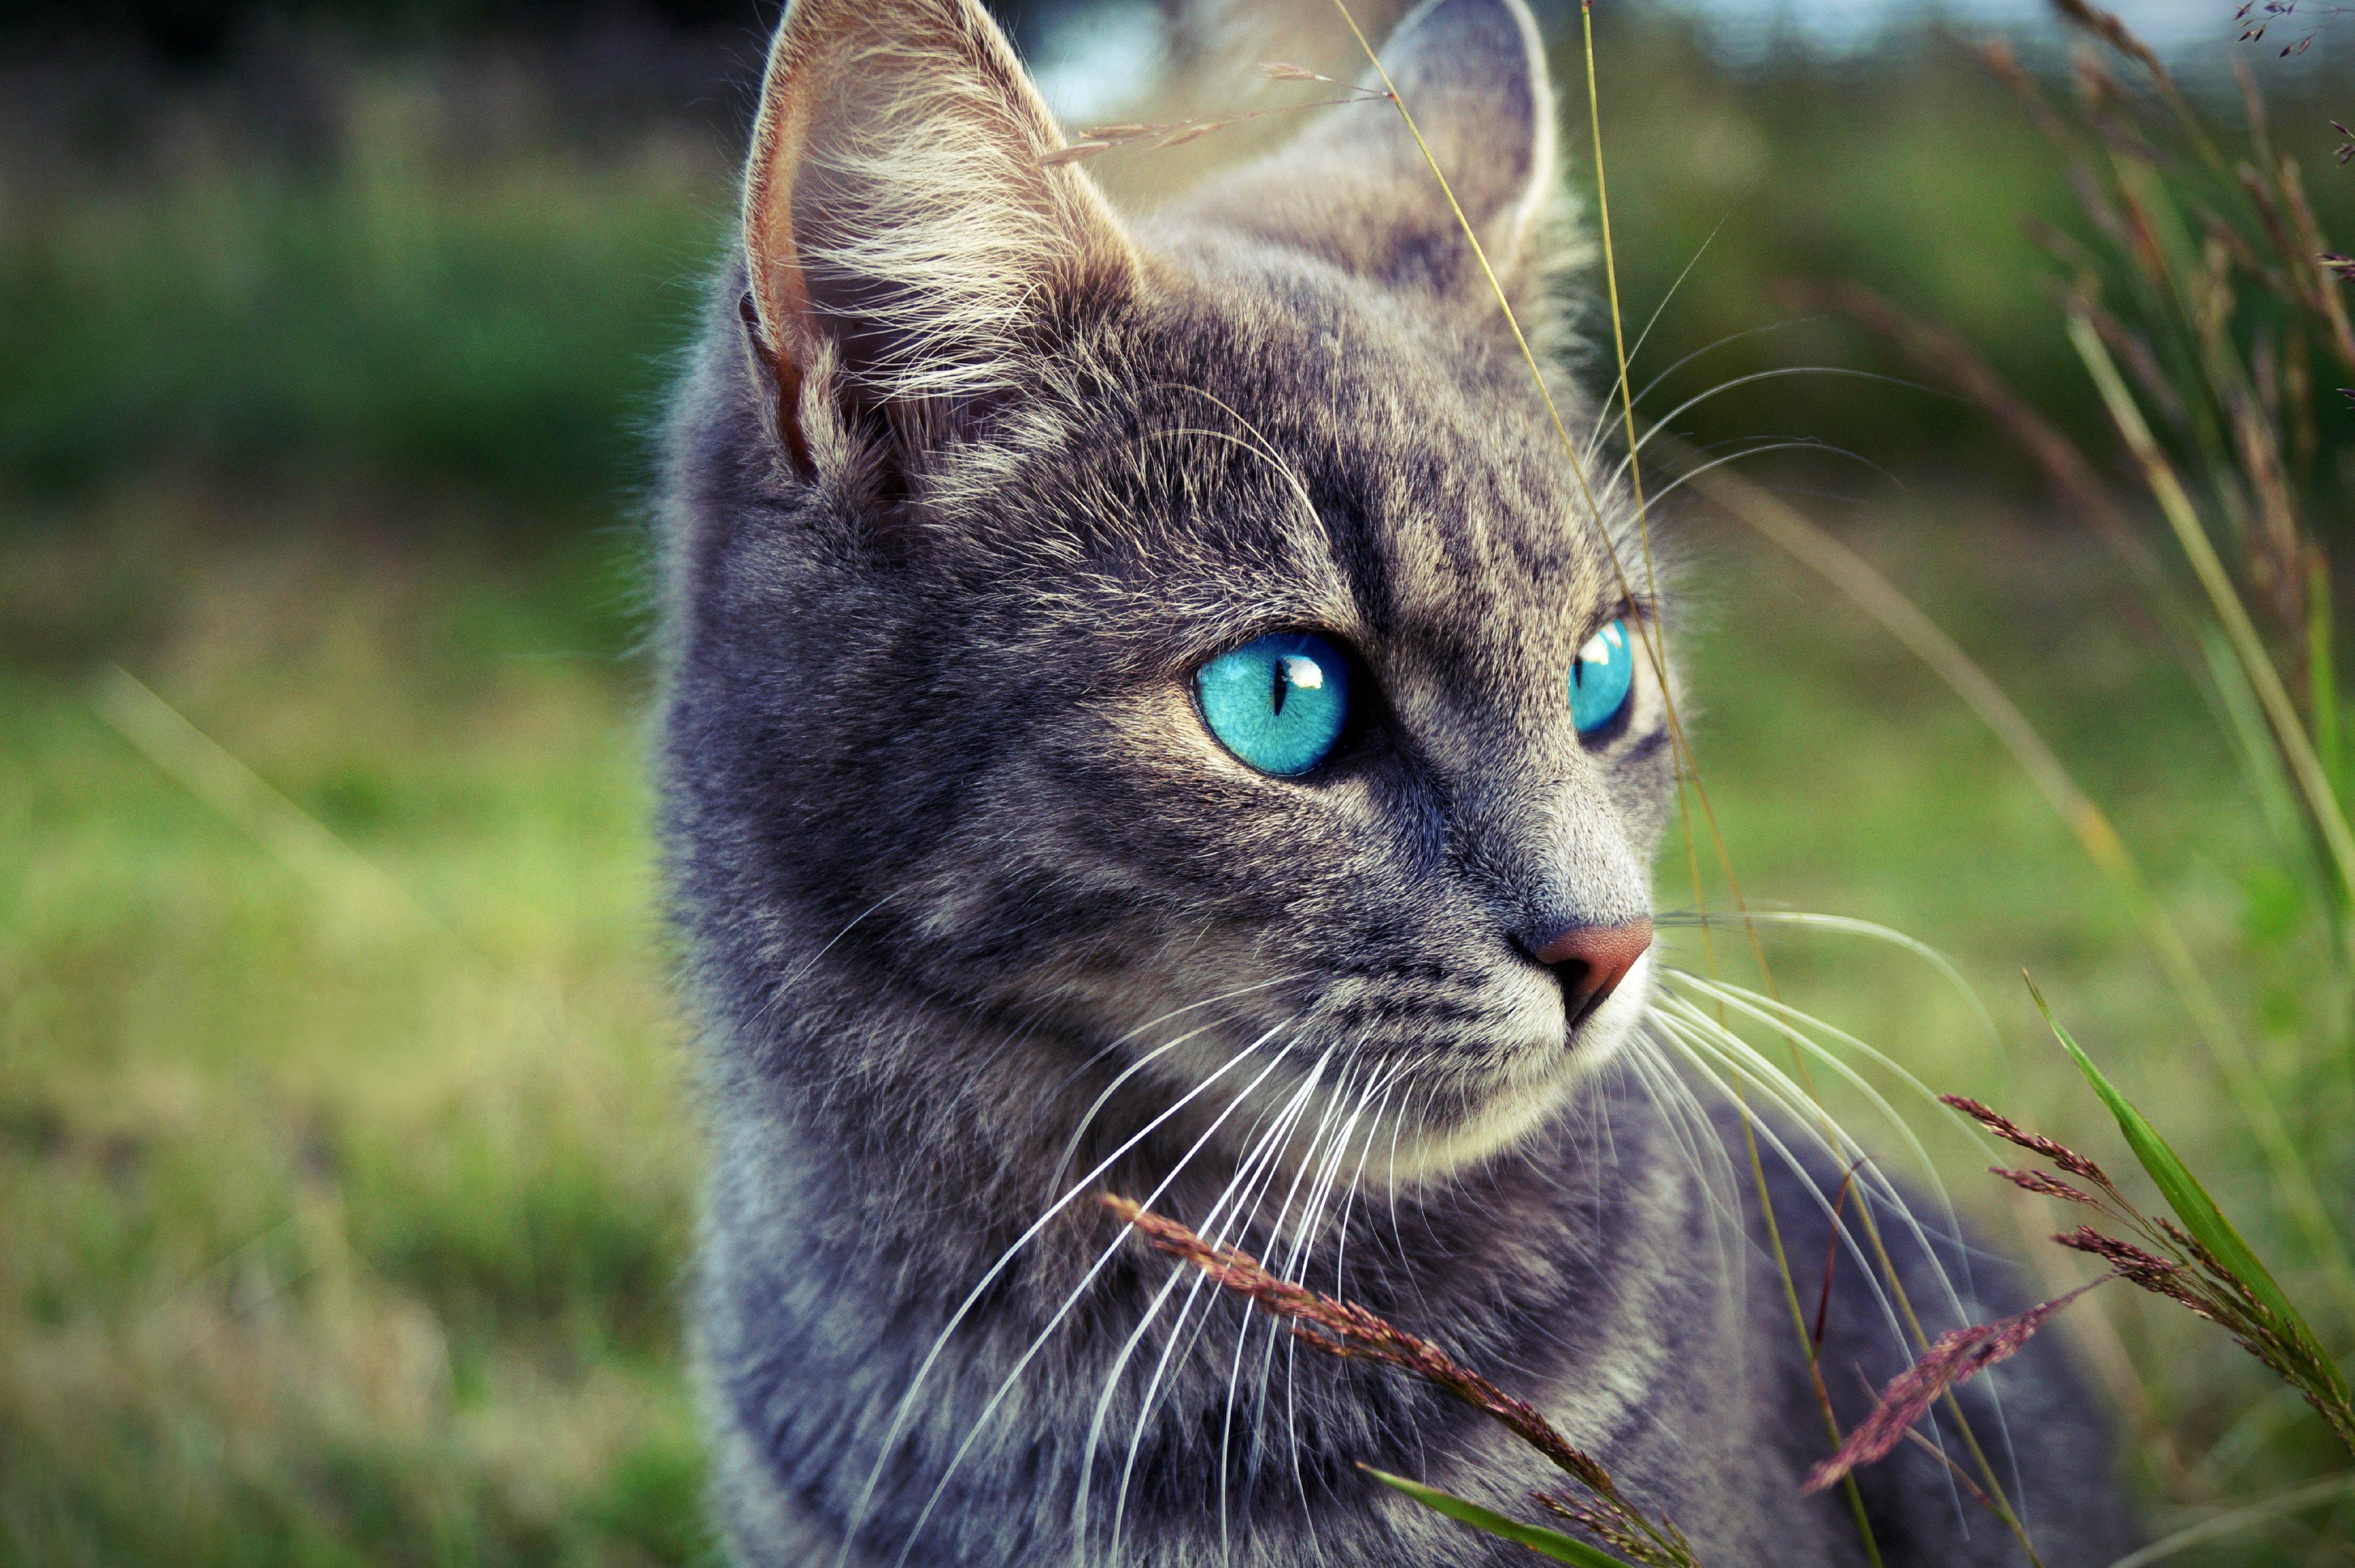 The blue-eyed kitty looks away